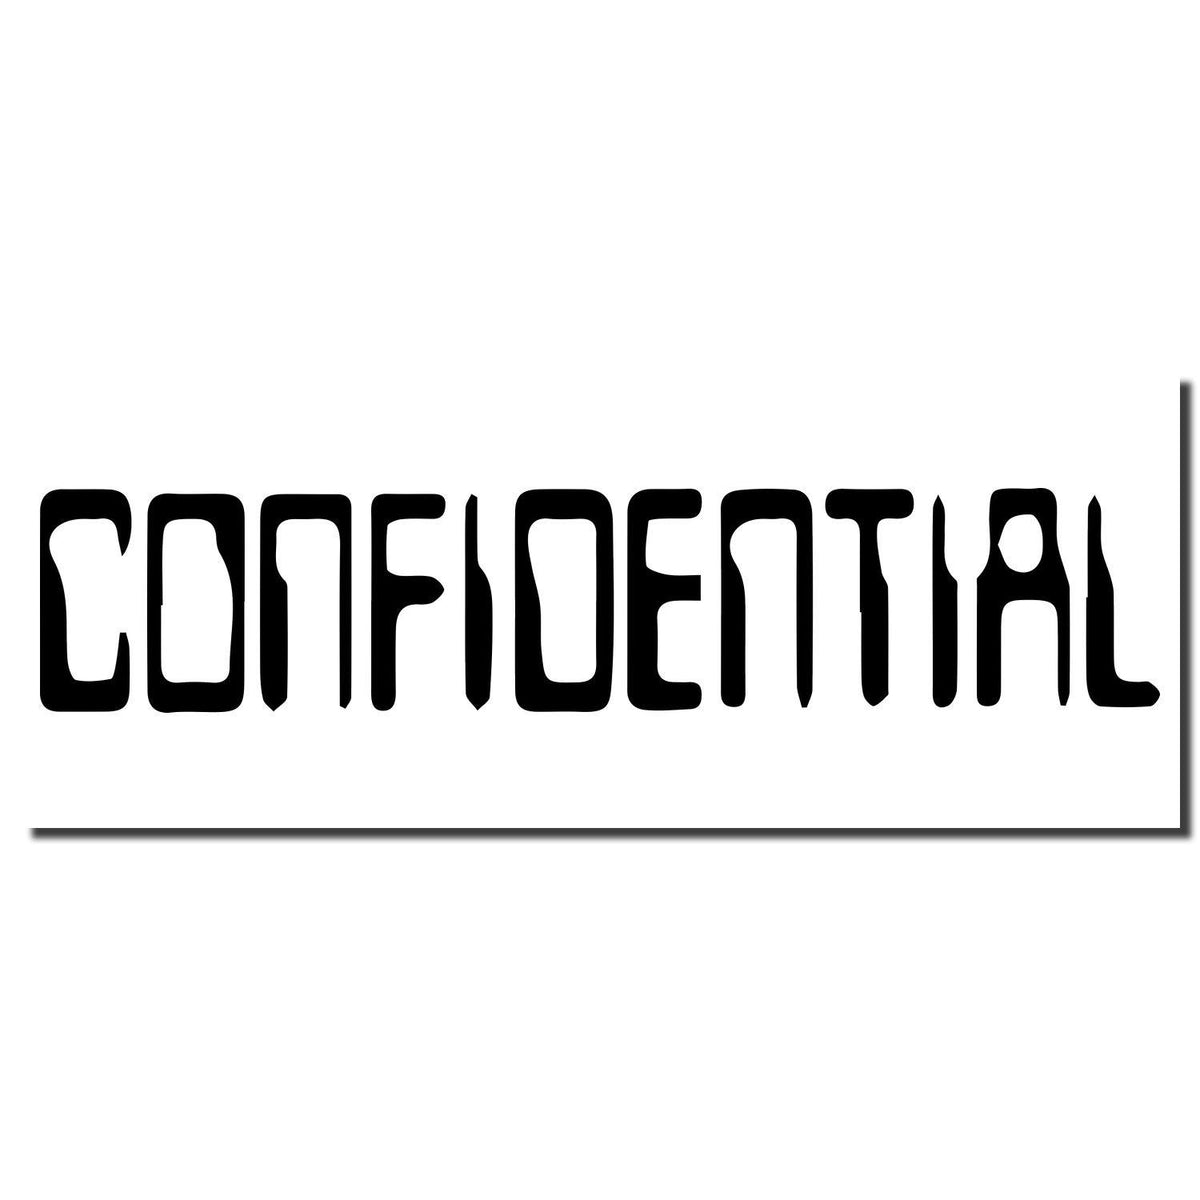 Enlarged Imprint Large Self-Inking Barcode Confidential Stamp Sample